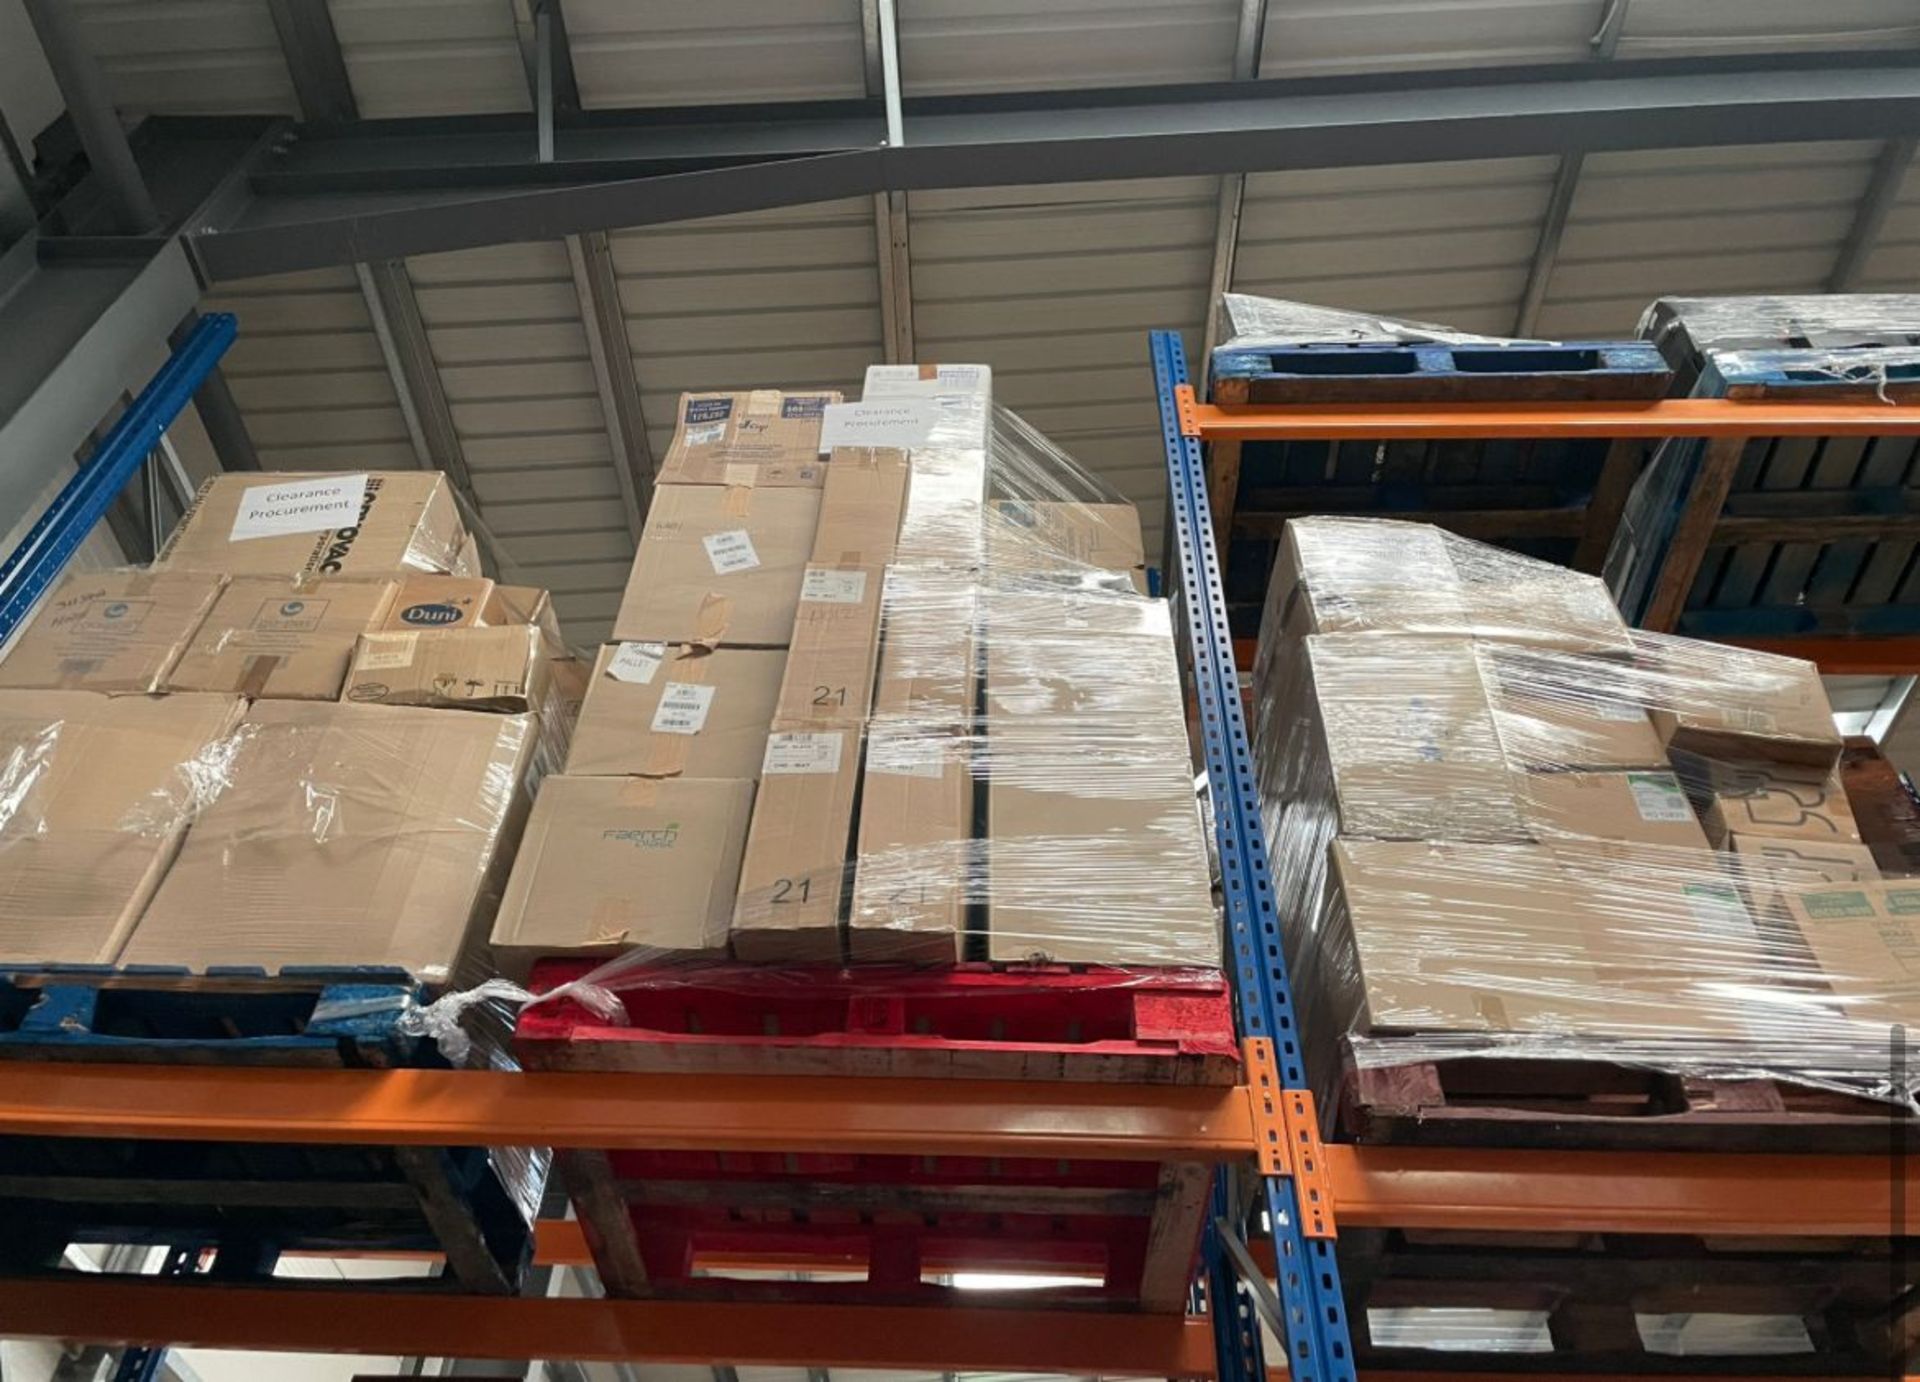 TRUCKLOAD OF NEW PACKAGING MATERIALS